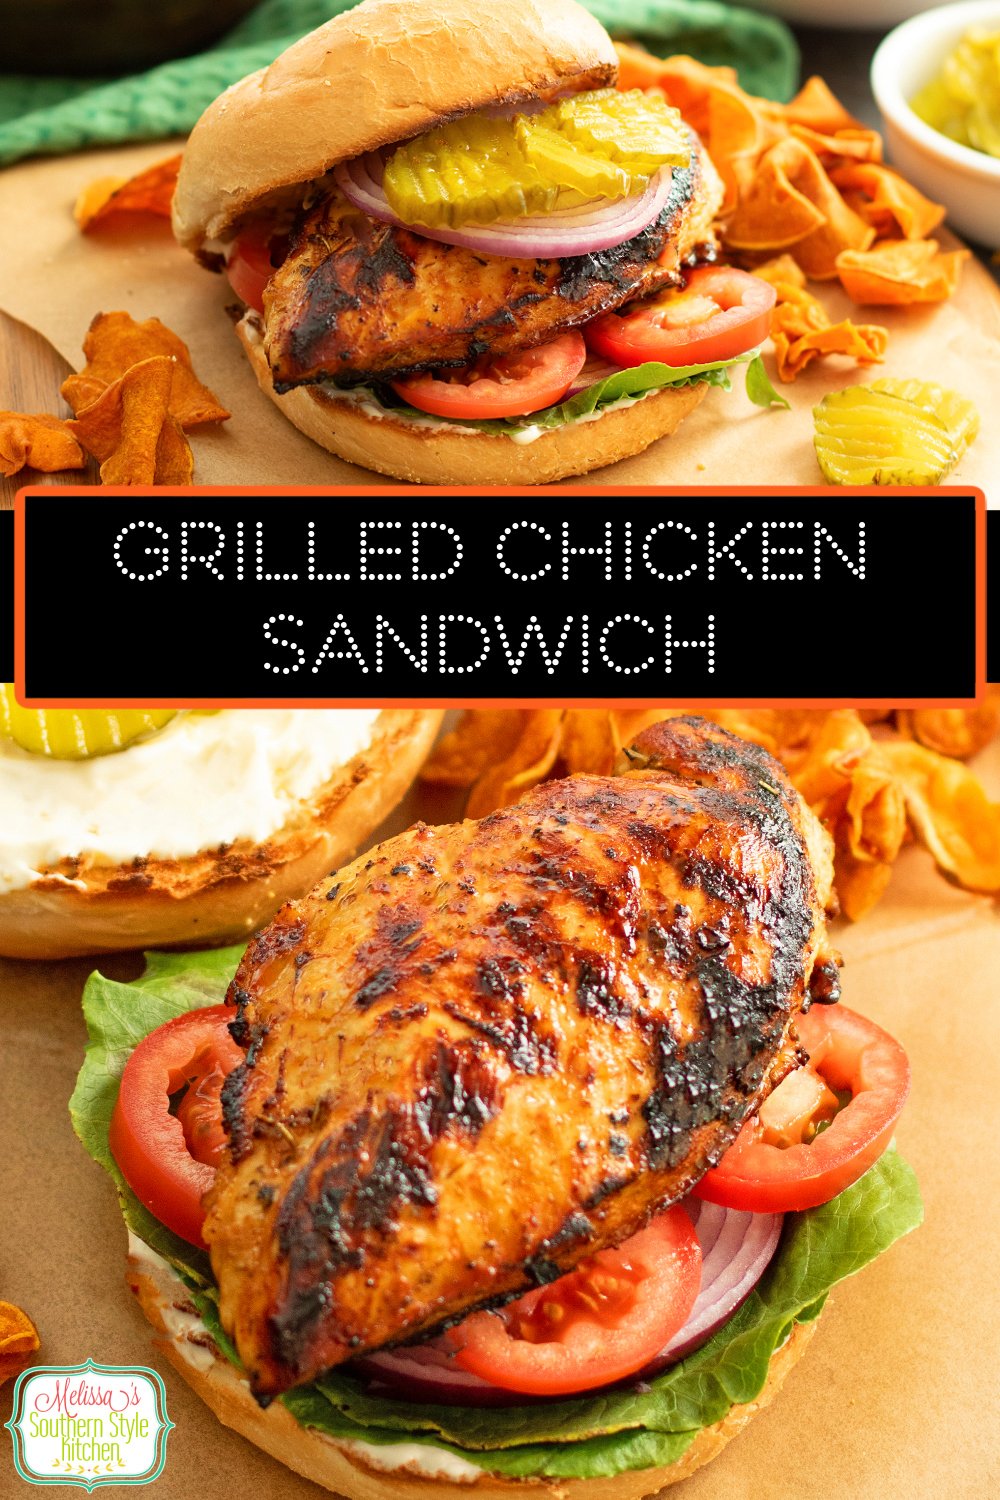 This flavorful Grilled Chicken Sandwich features a homemade marinade that packs a pop of flavor. #grilledchicken #easychickenrecipes #chickenbreastrecipes #chickensandwich #howtomakechicken #easychickenrecipes